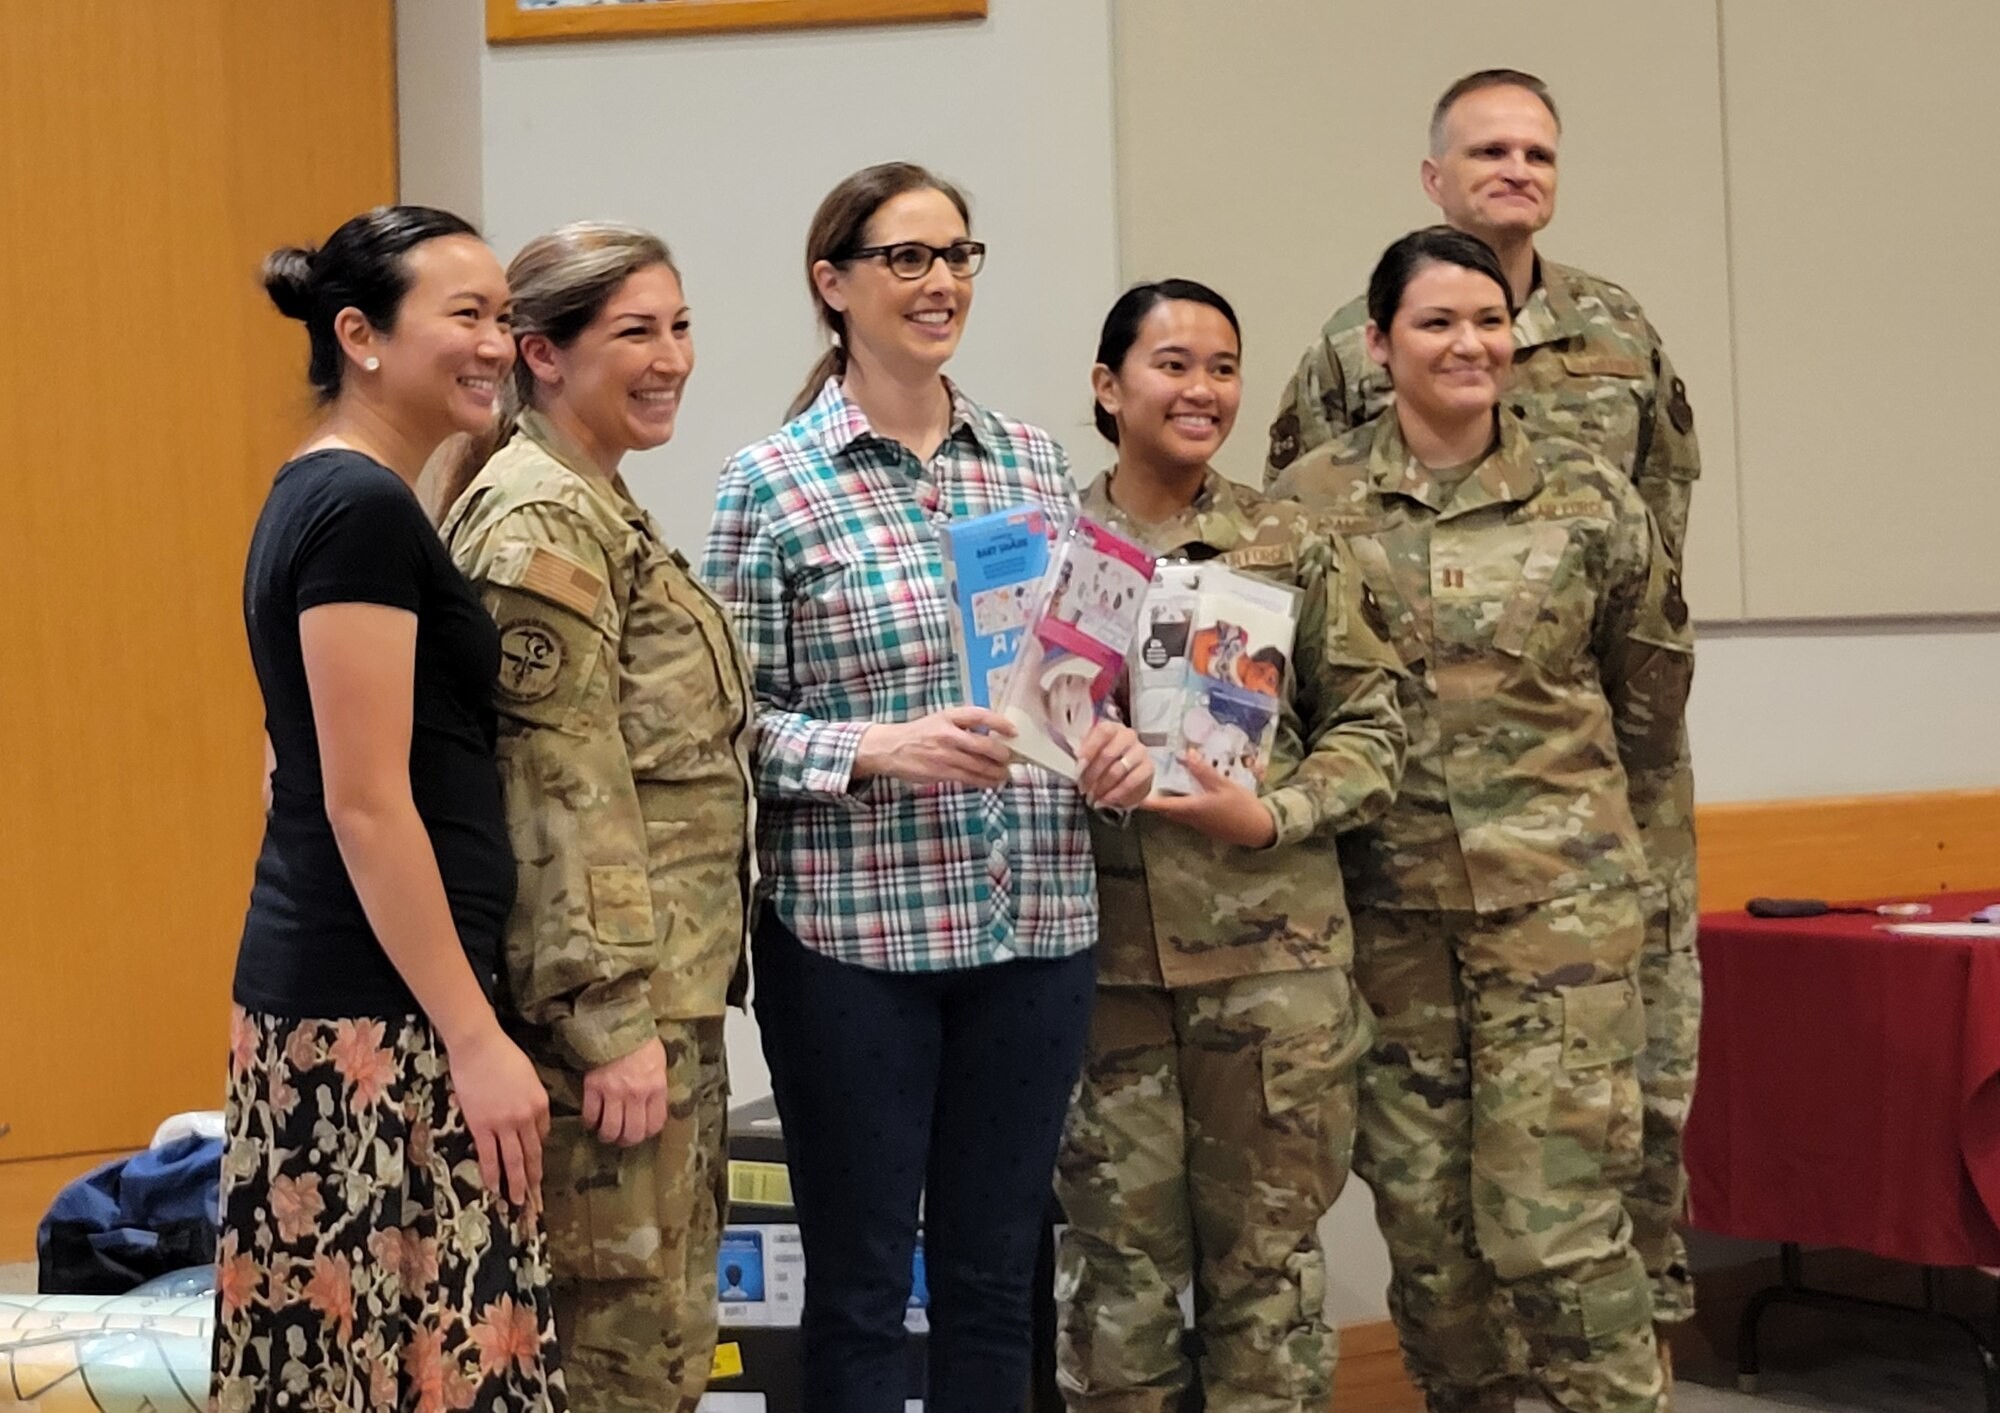 BAMC Auxiliary grants support patients, staff Article The United States Army